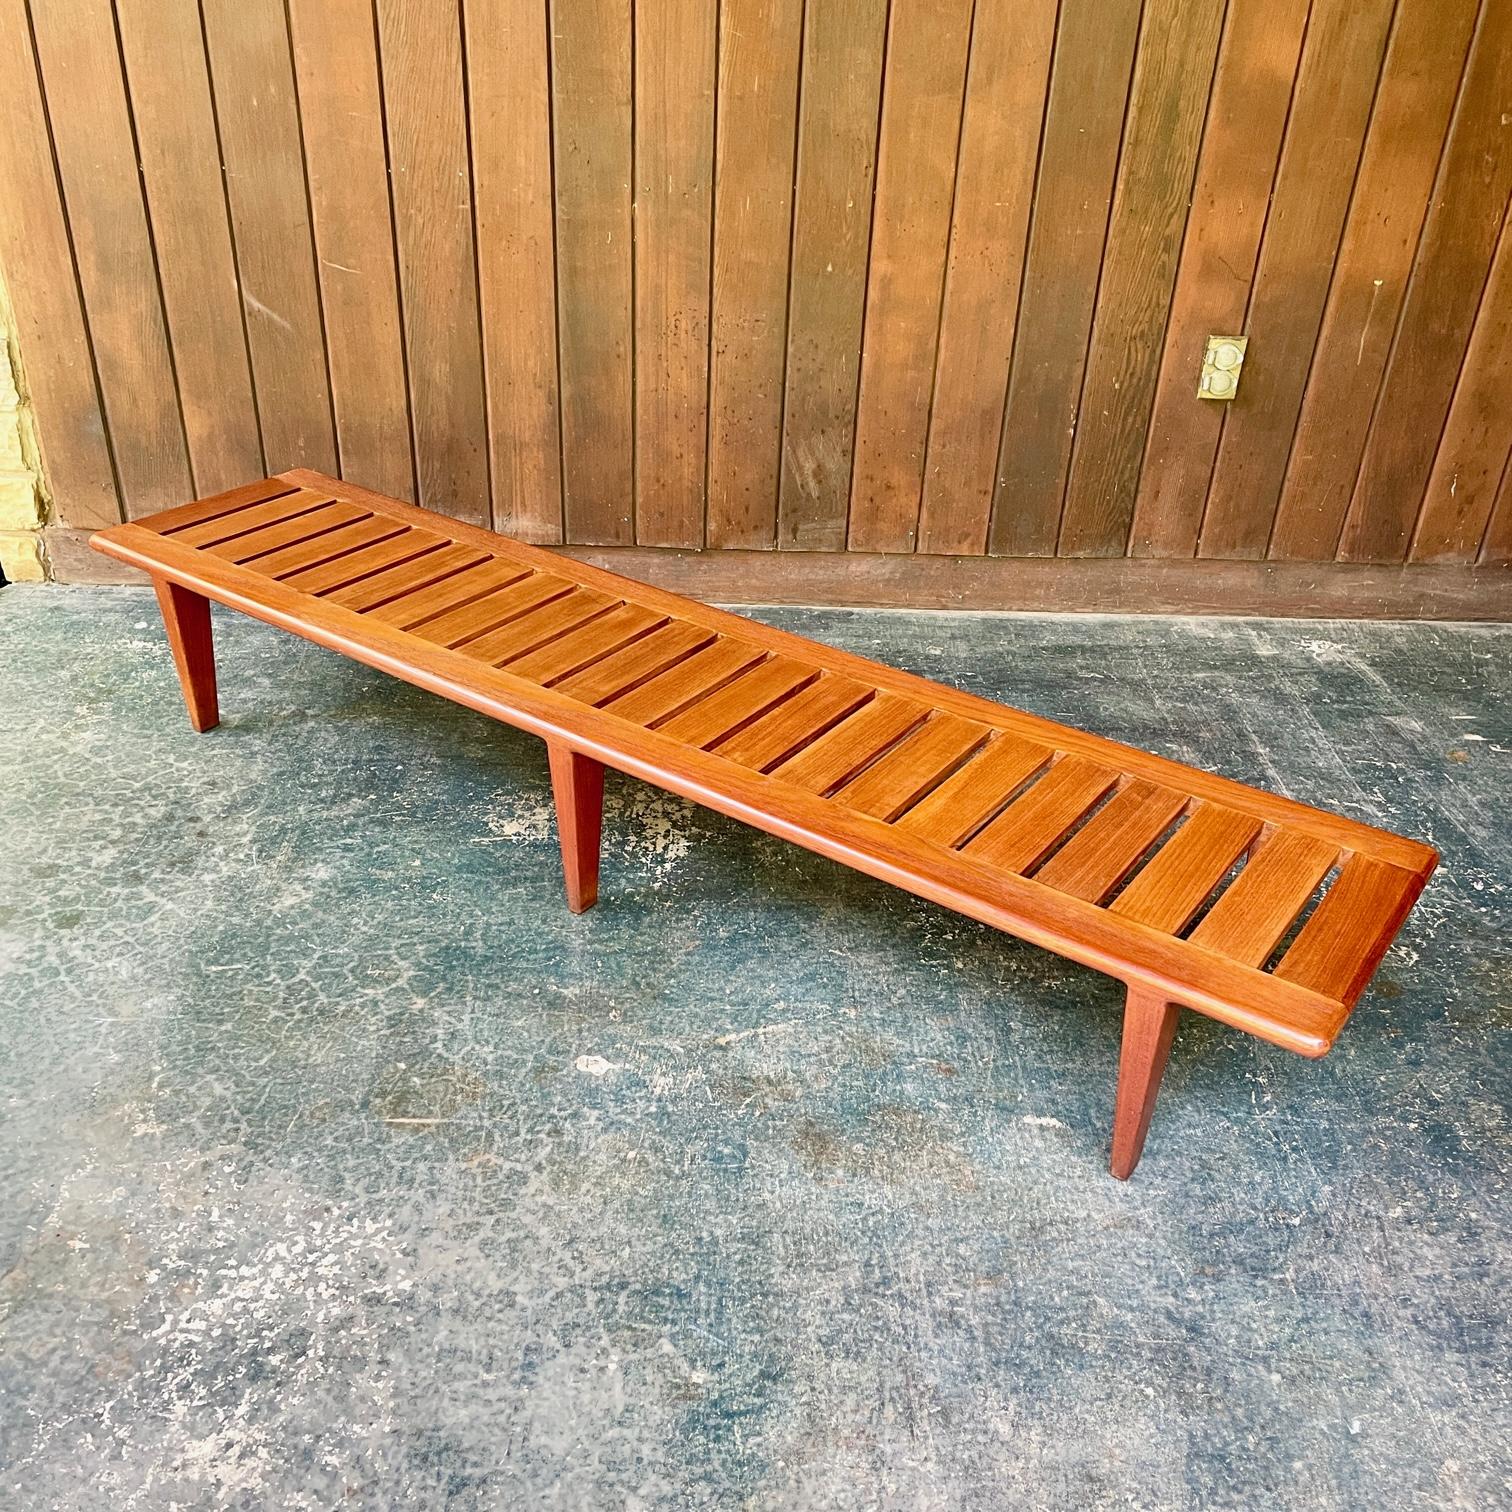 This is the largest Model JH-574 Bench. In the original finish. Showing wear from use. All joinery is tight, and this bench is ready to use. Also has a nice neat full burnished label. Pillows shown are not included. 

L 76.75 x W 16.75 x H 11.75